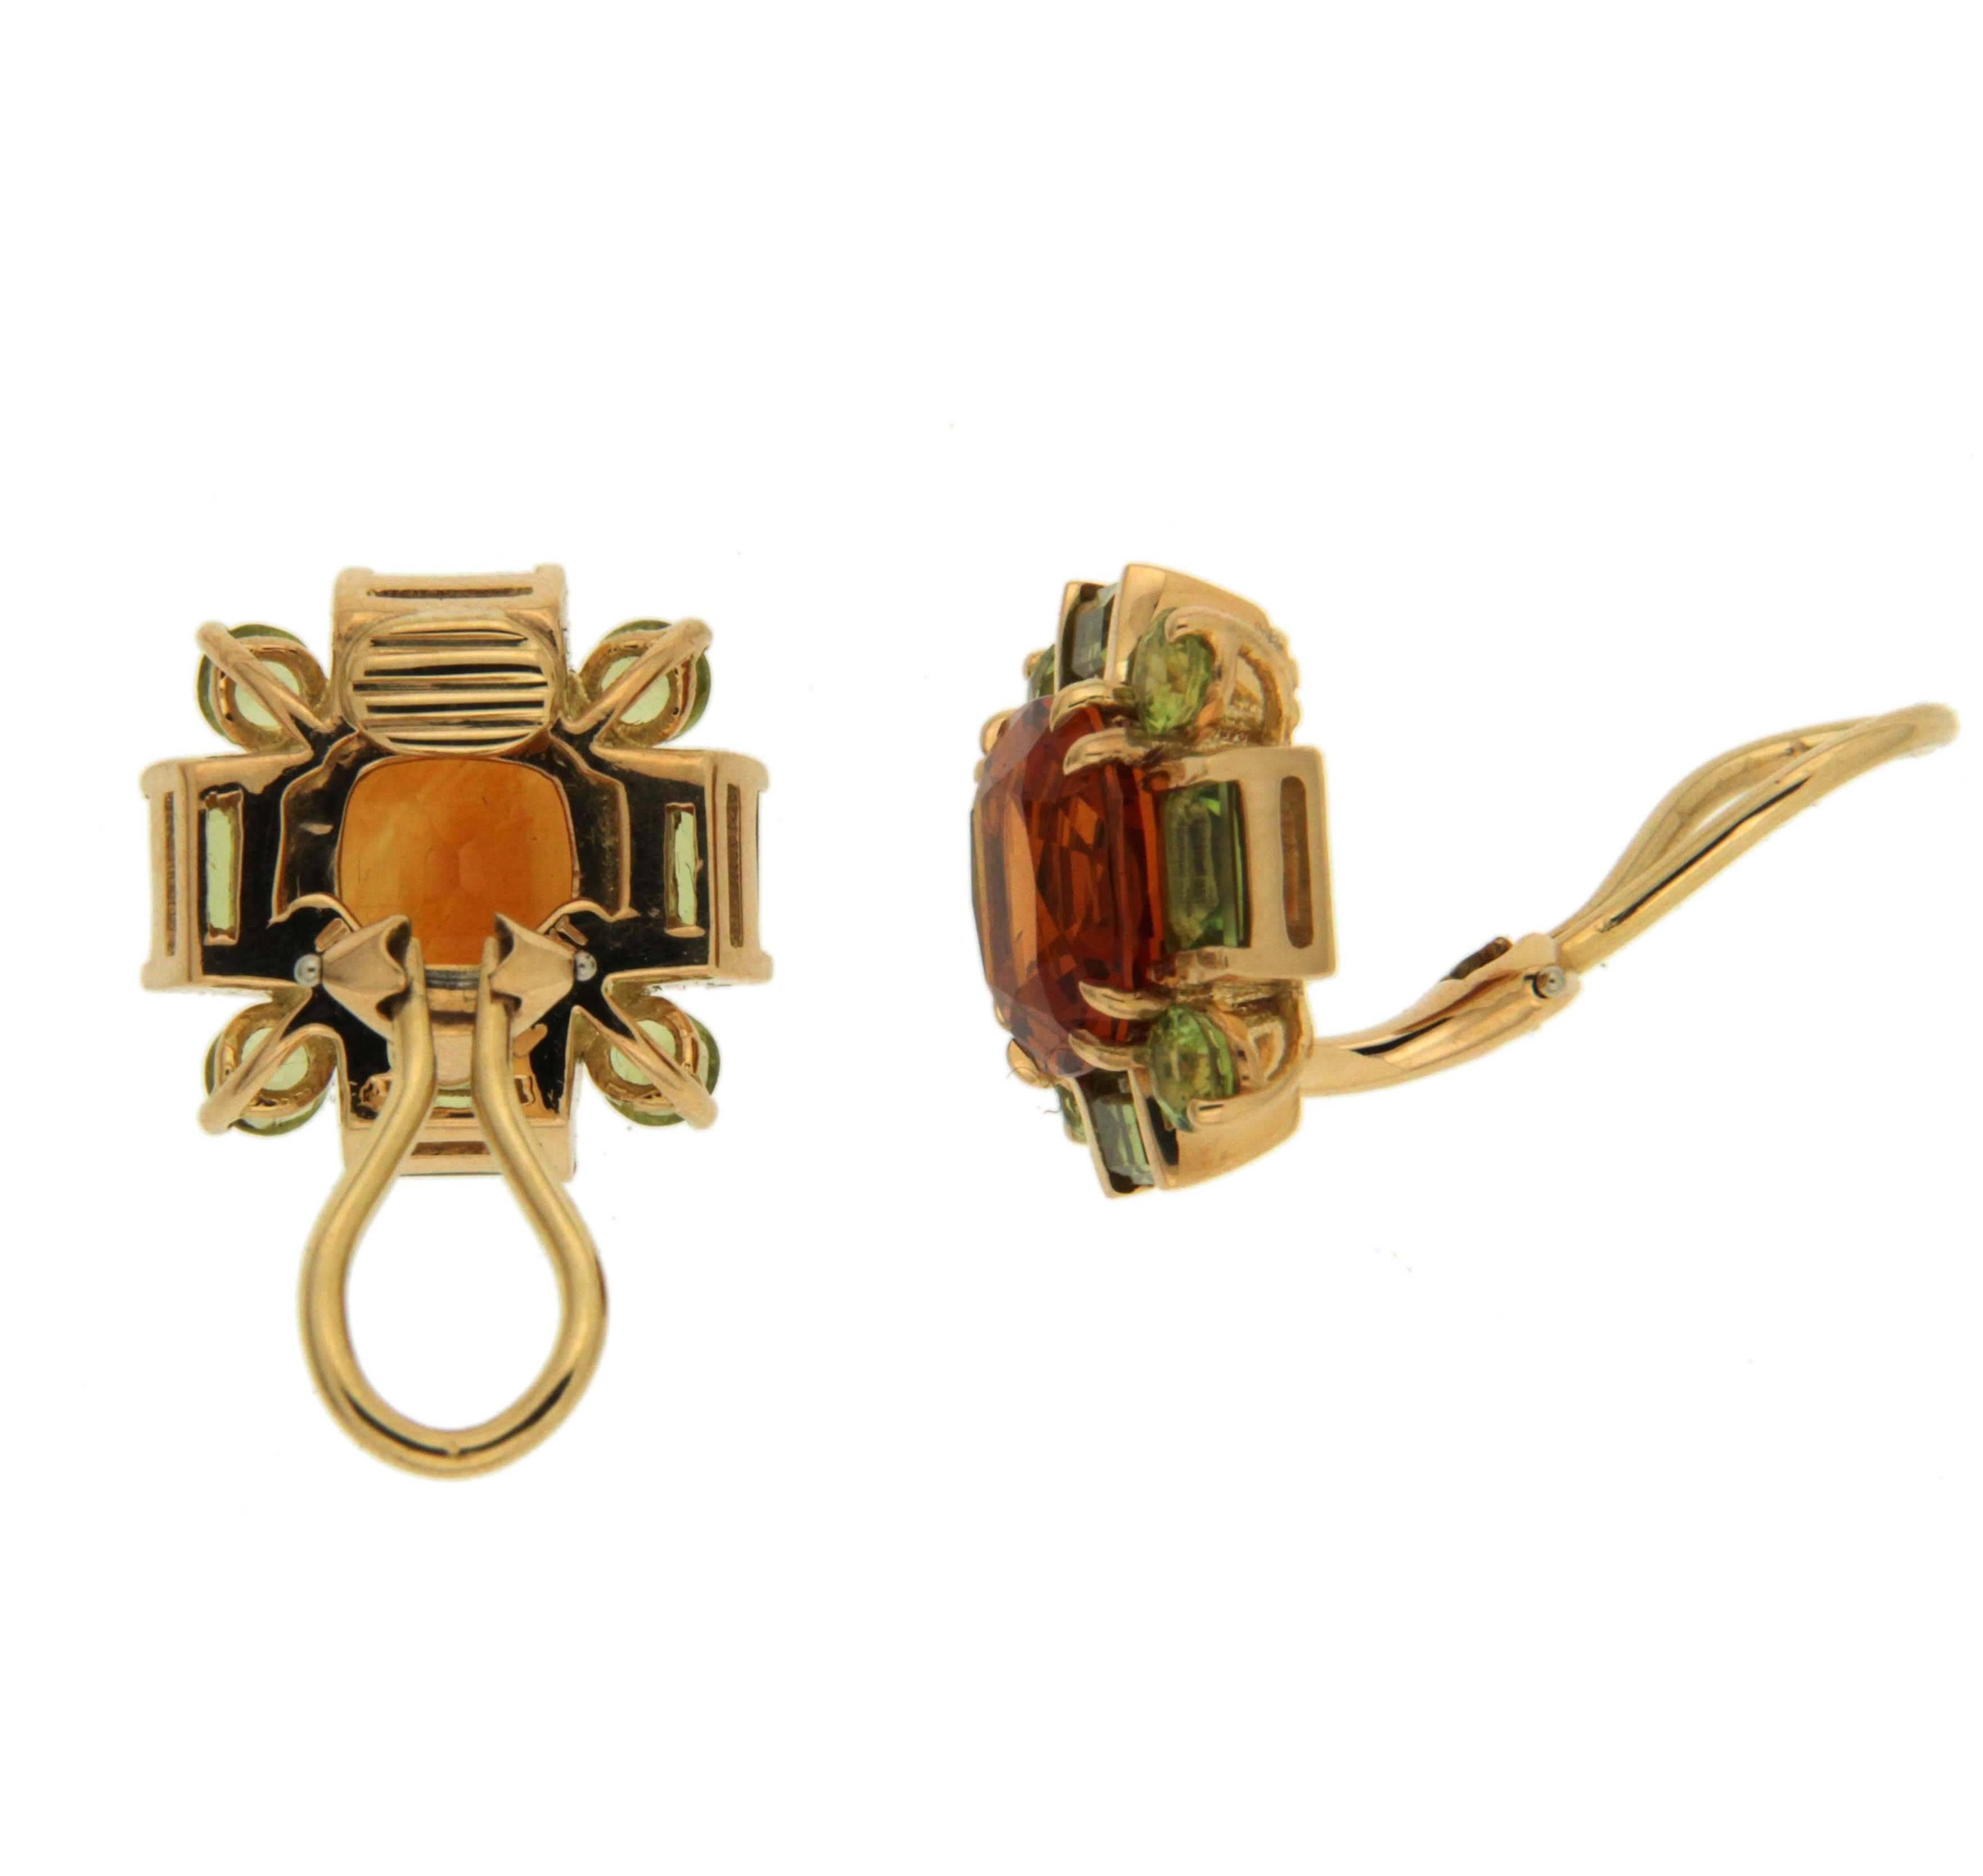 These earrings are made in 18kt yellow gold, they feature cushion cut citrine stone in the center and round and baguette peridot stones all around, they are finished with clip-backs.

Citrines total weight 8.28 ct
